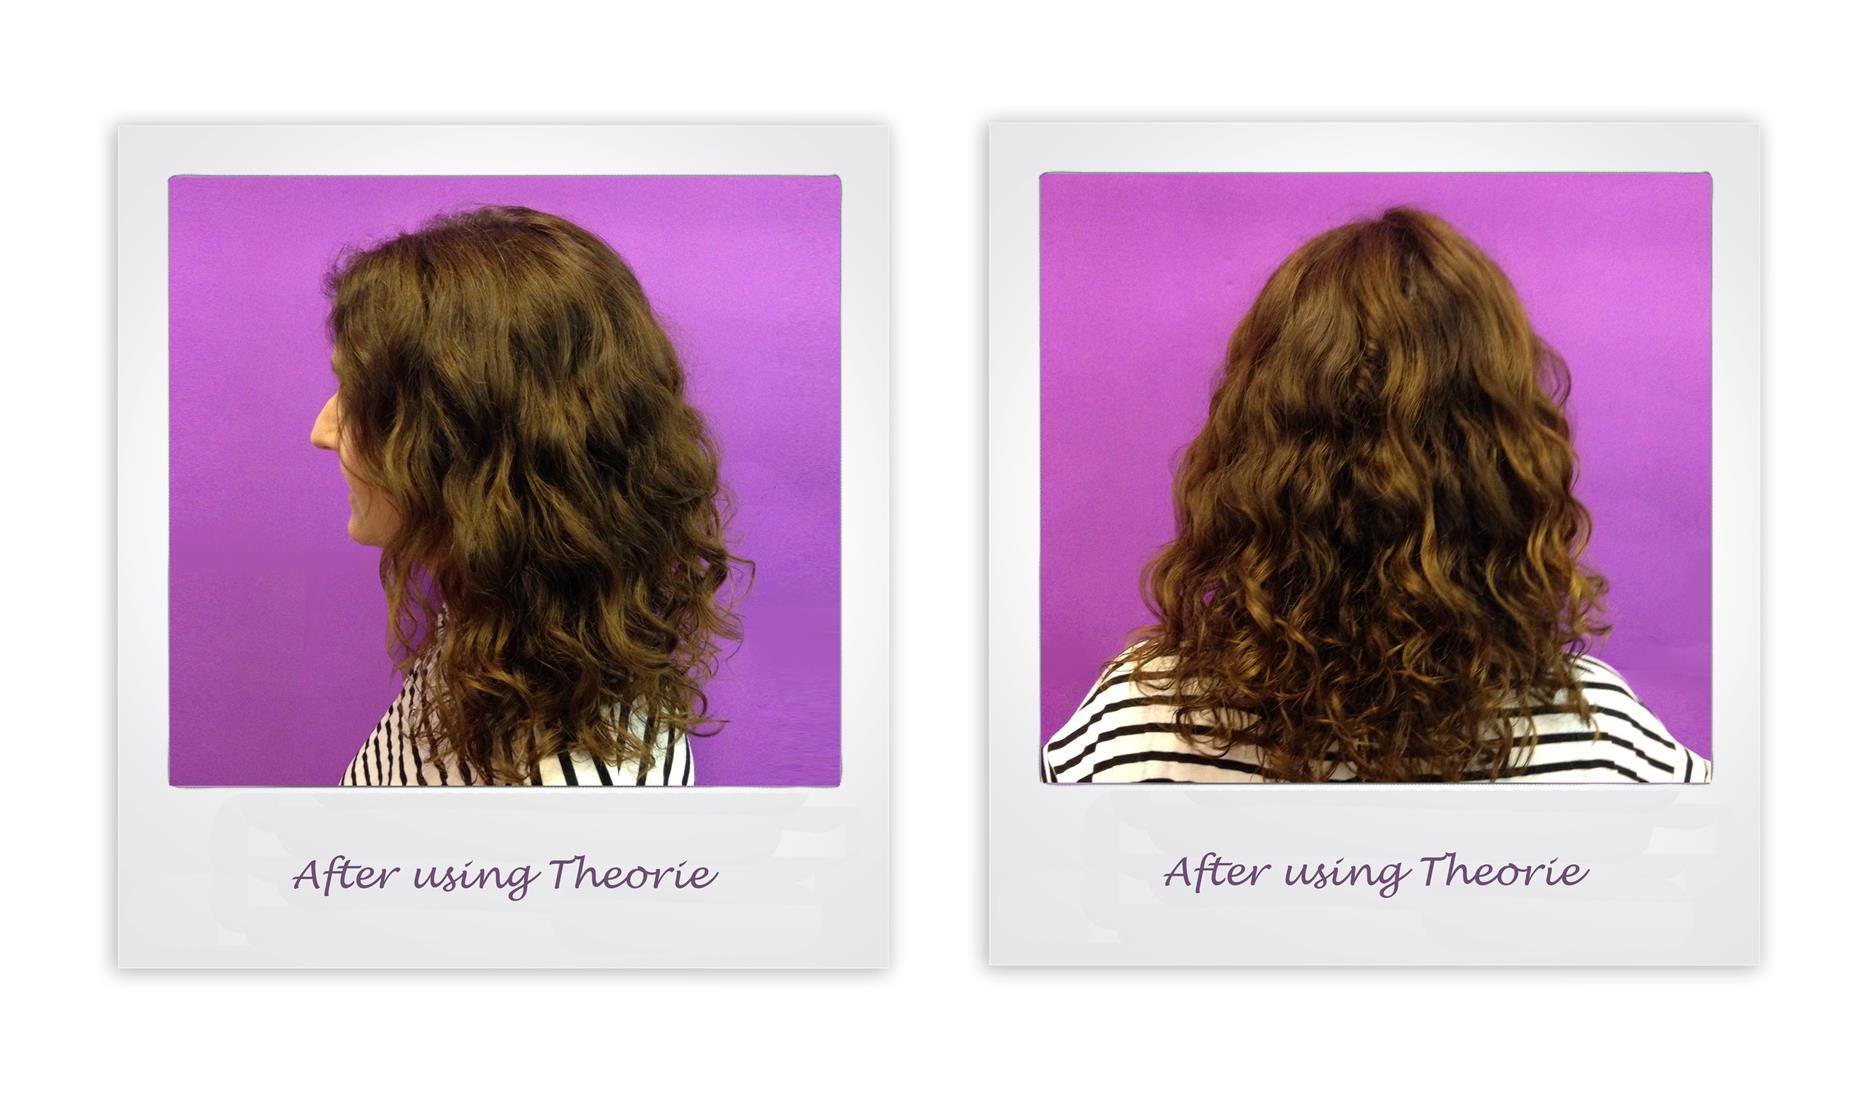 The result from using Theorie hair products